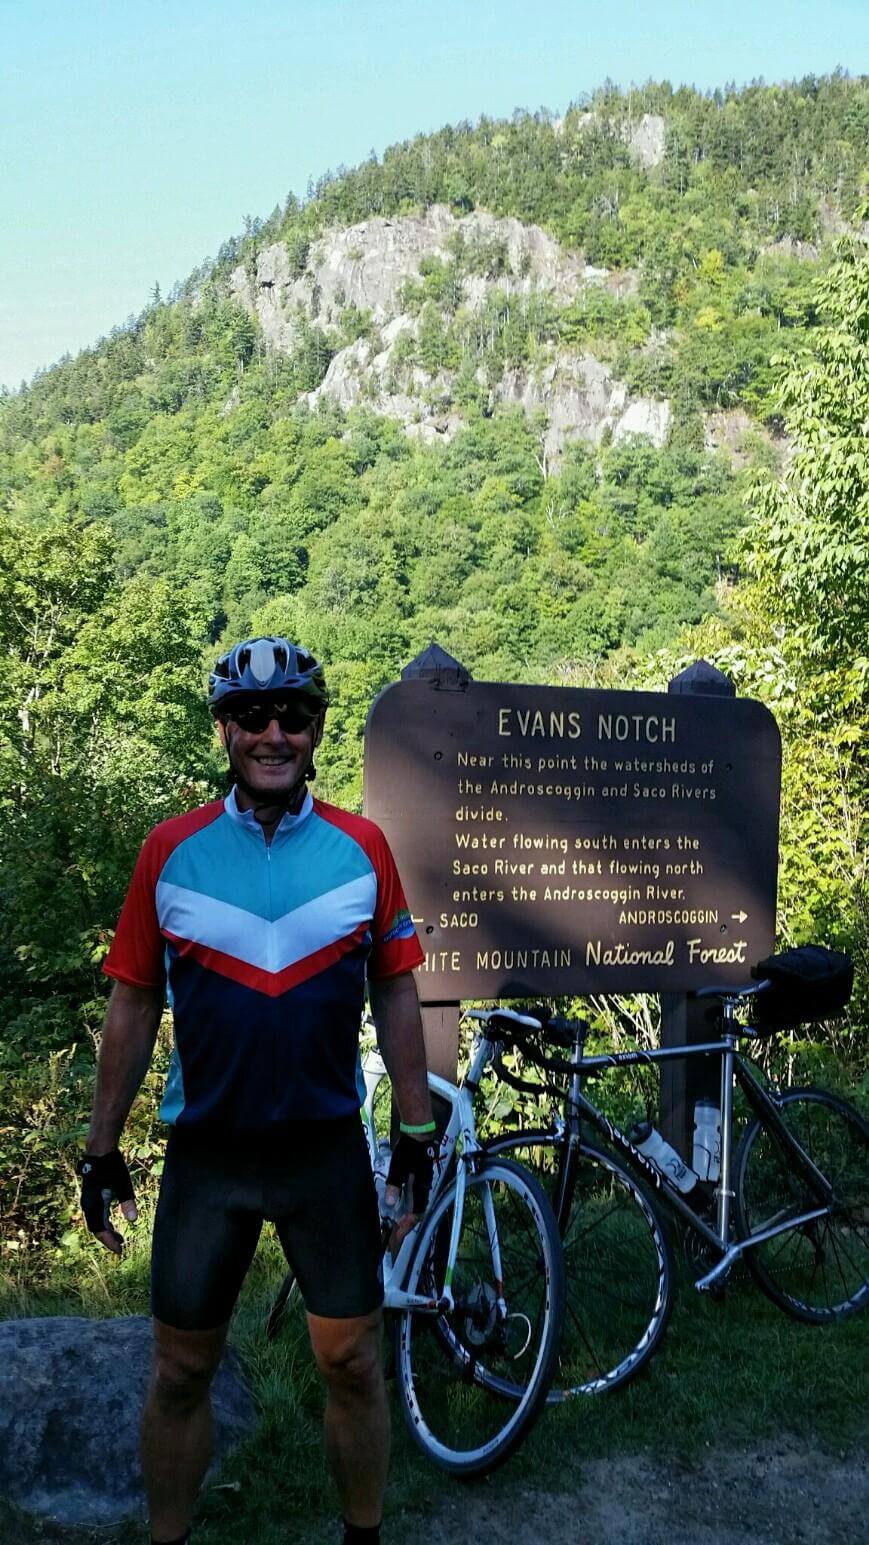 Barry and bike in Evans Notch